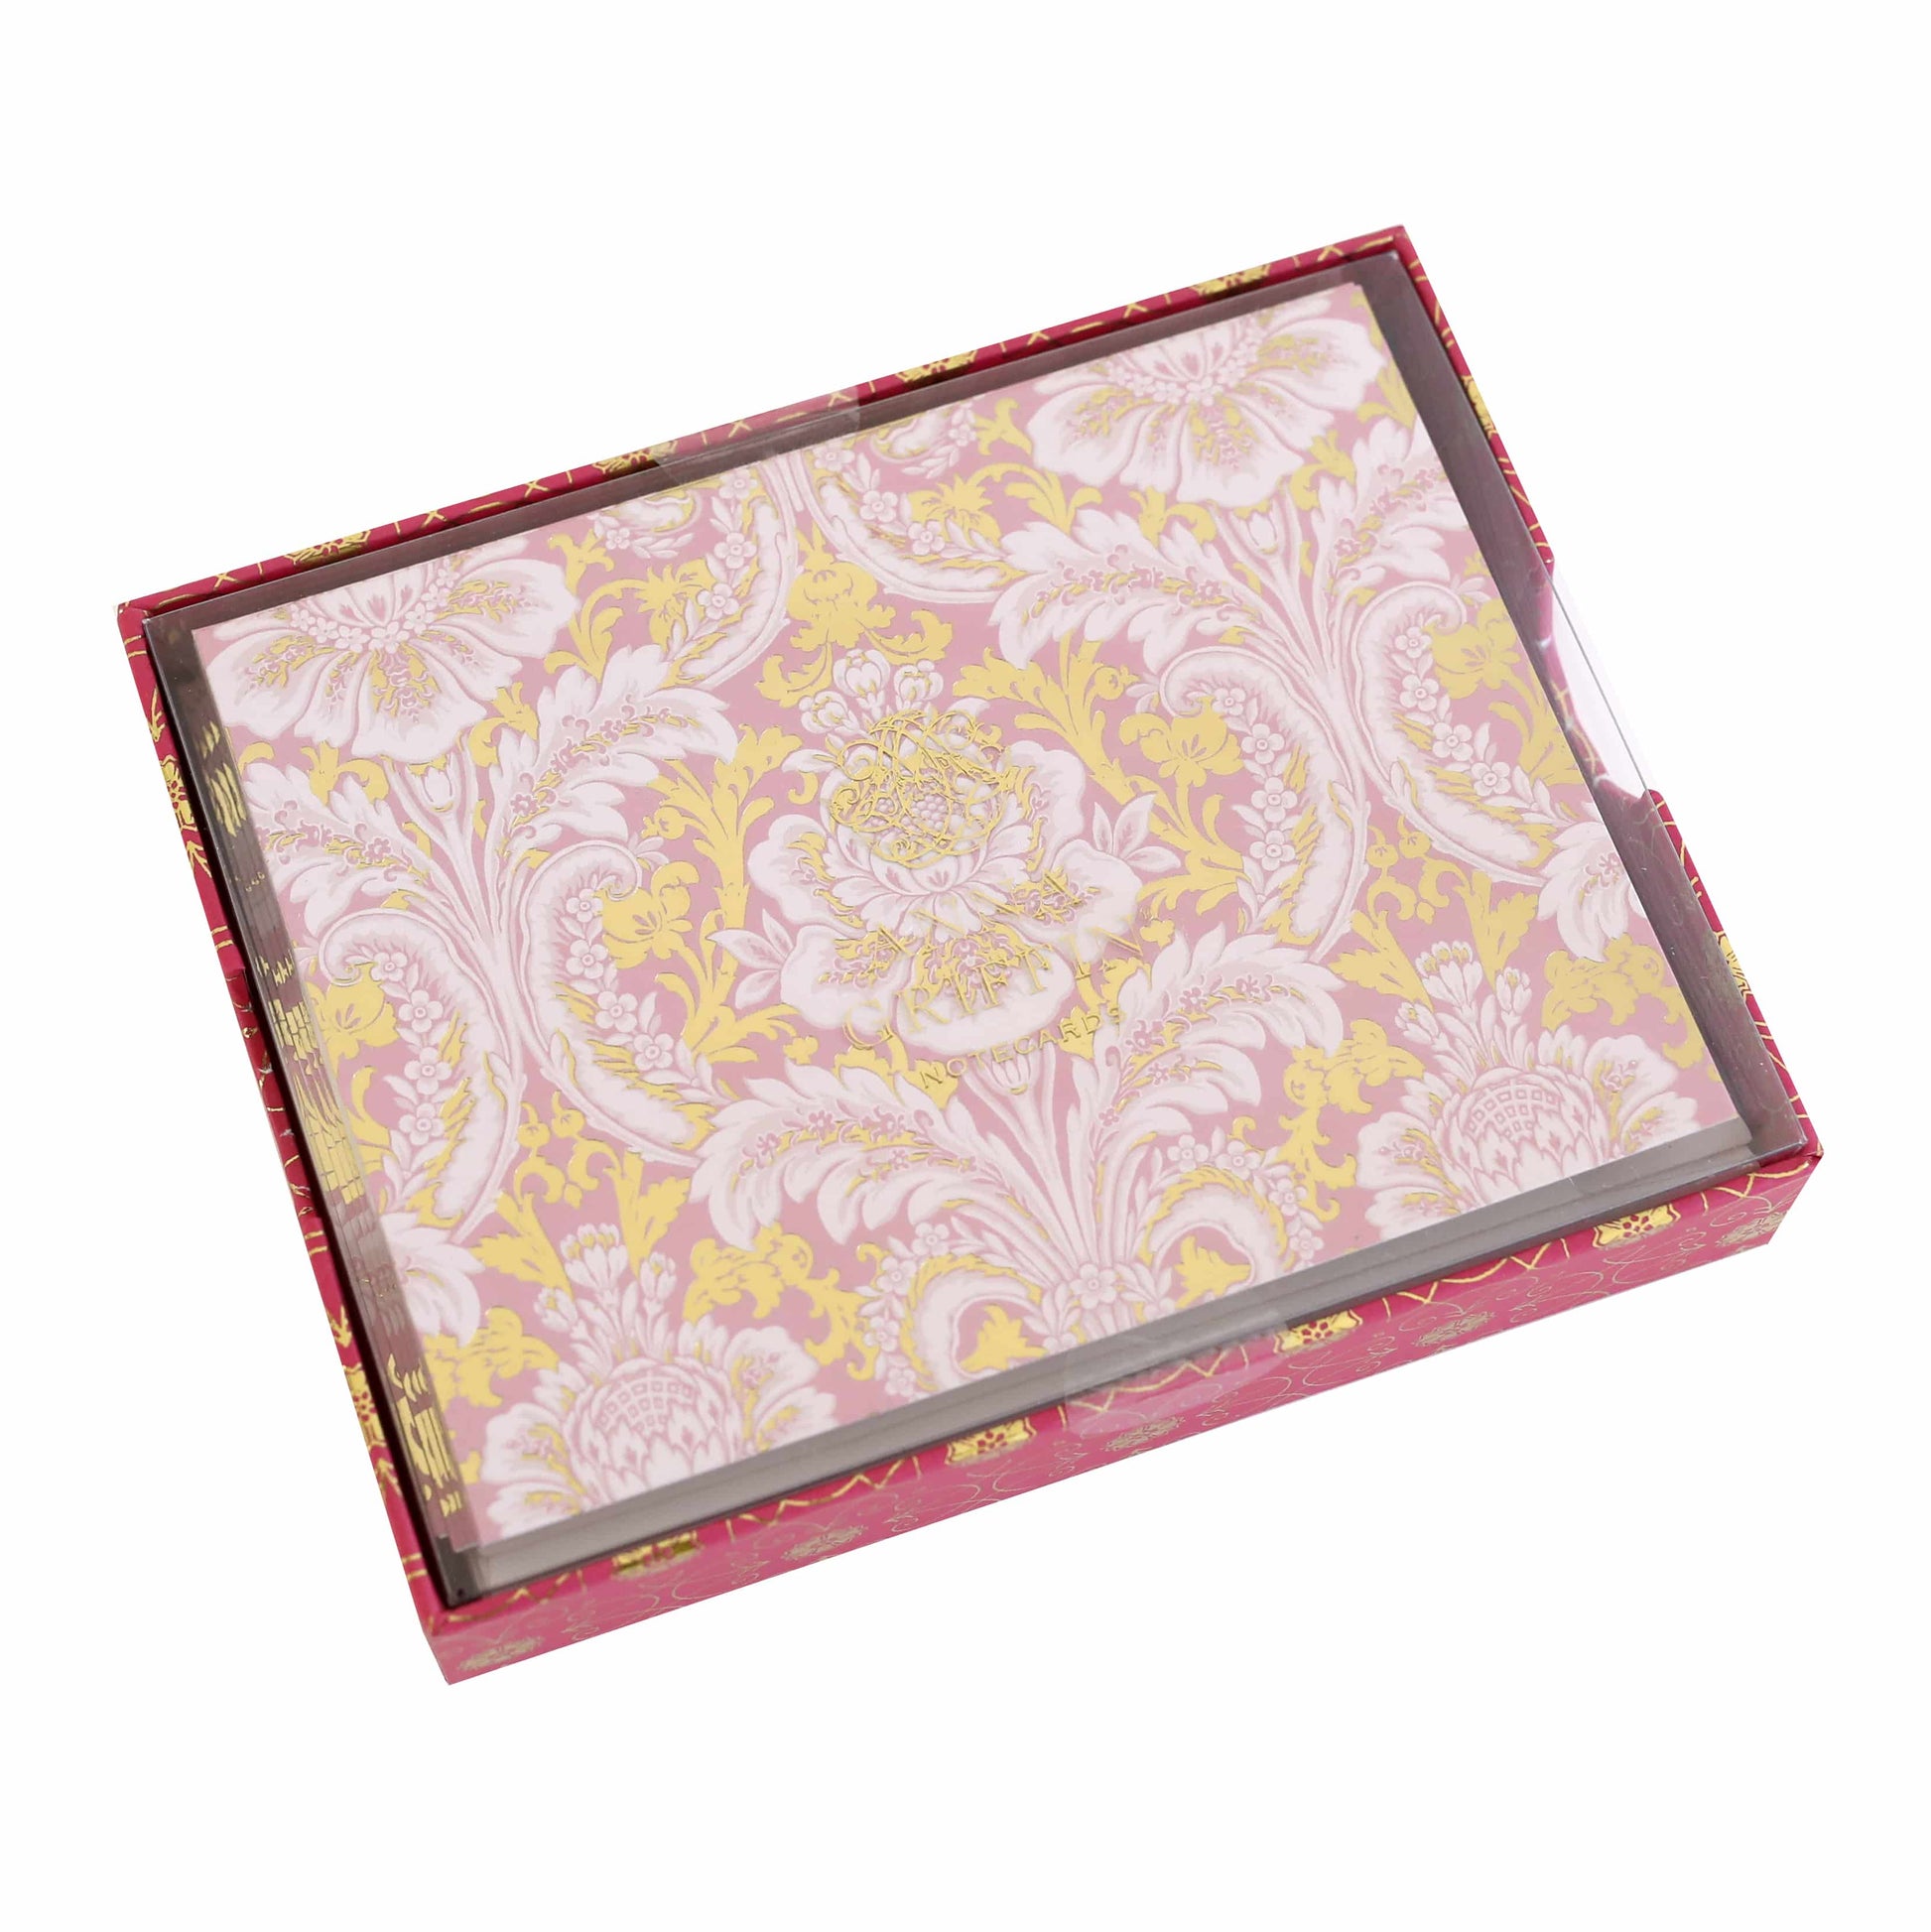 a pink and yellow box with a flower pattern on it.